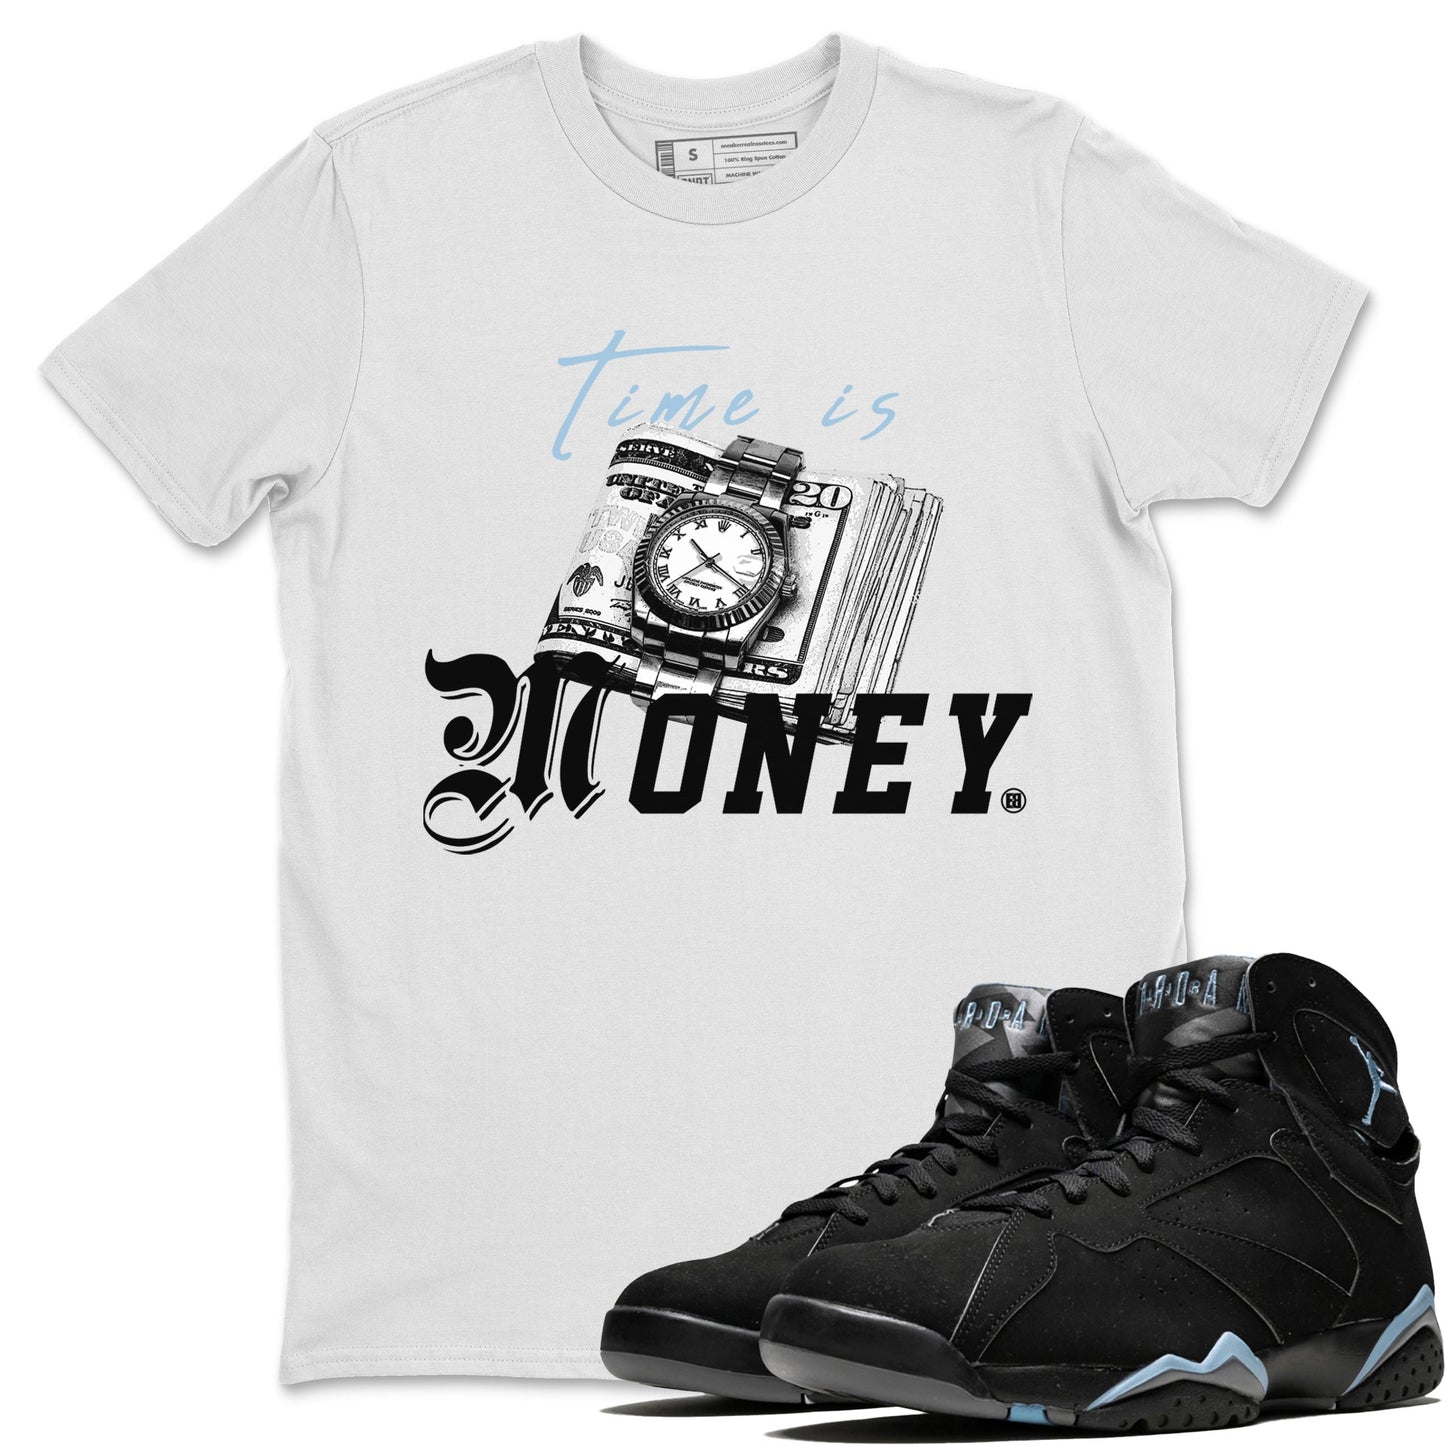 Air Jordan 7 Chambray Sneaker Match Tees Time Is Money Sneaker T-Shirt AJ7 Chambray Sneaker Release Tees Unisex Shirts White 1